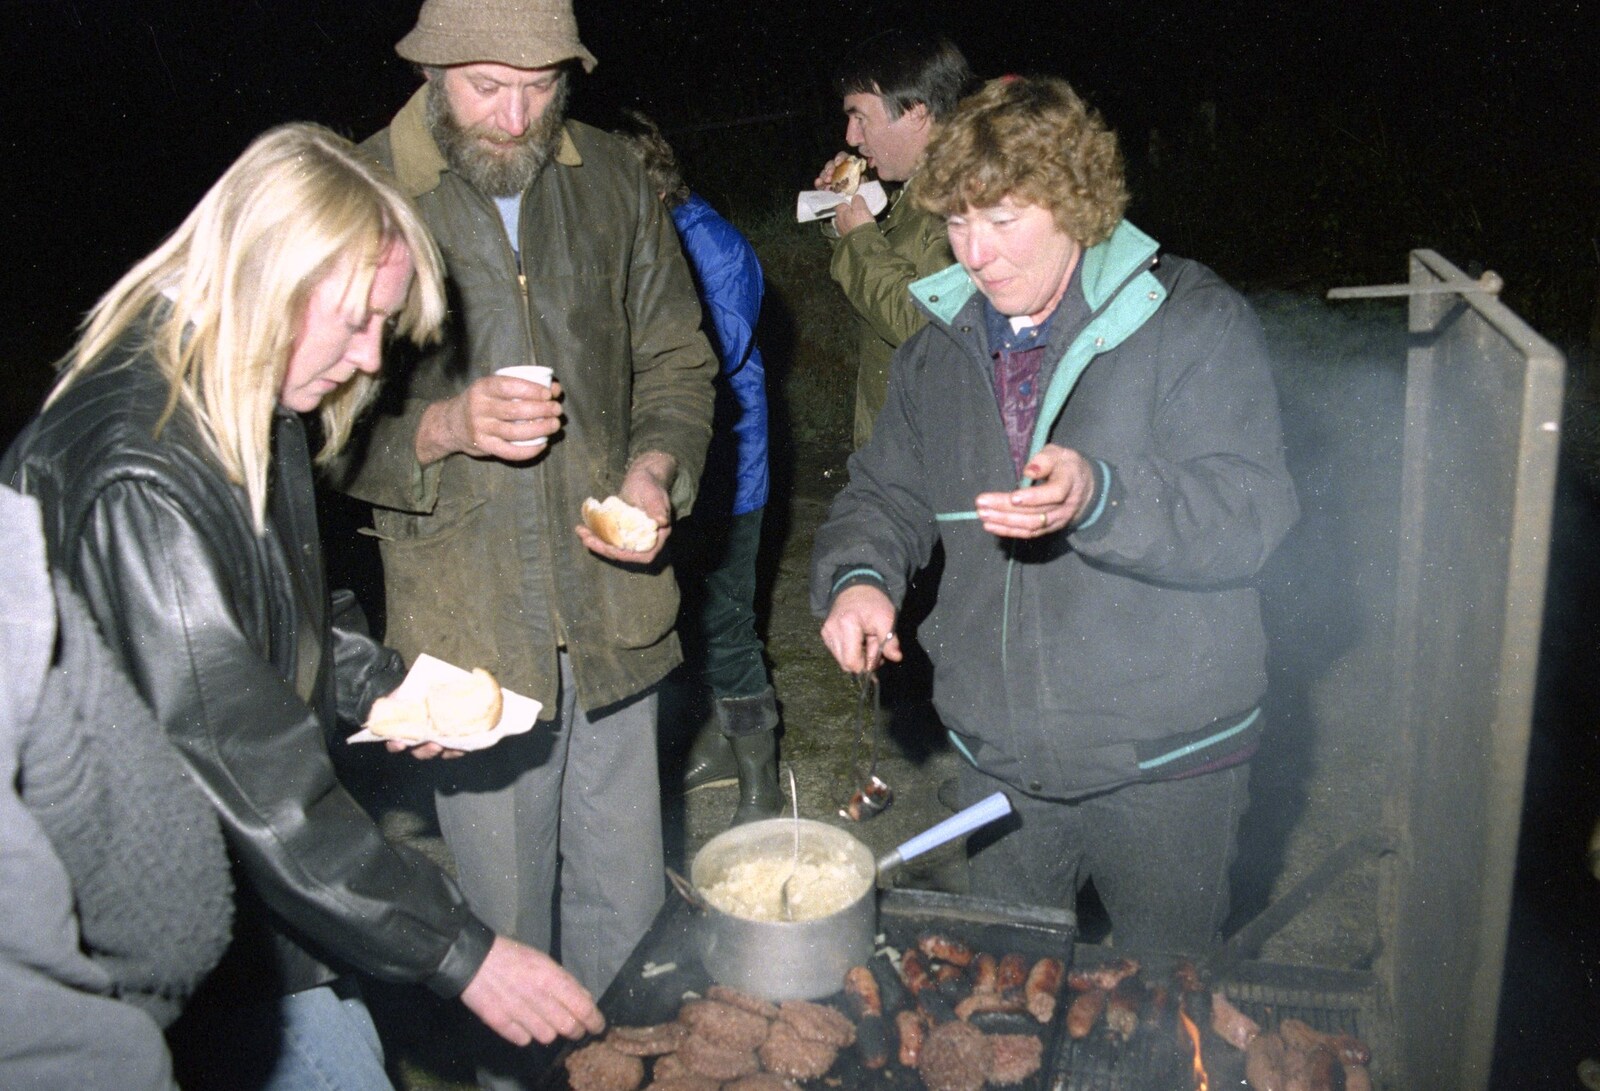 It's time for burgers and sausages from Bonfire Night and Printec at the Stoke Ash White Horse, Suffolk - 5th November 1991